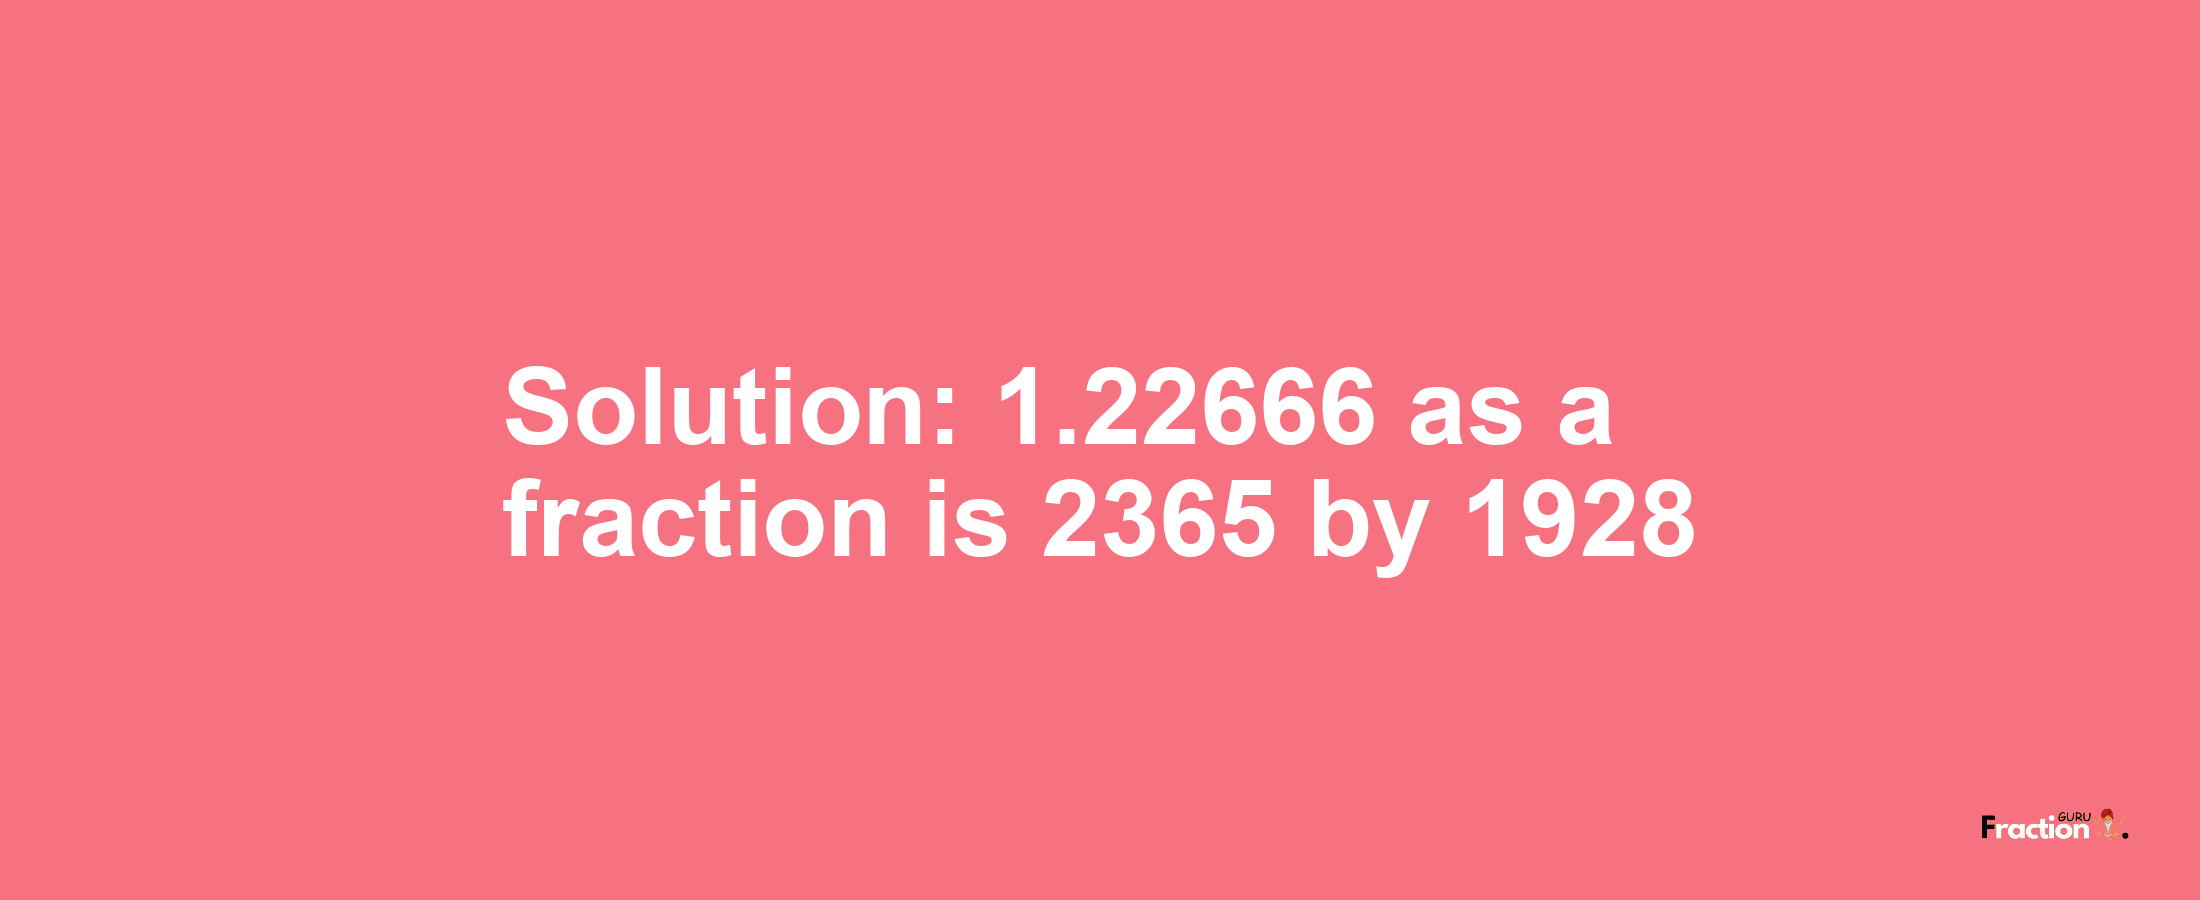 Solution:1.22666 as a fraction is 2365/1928